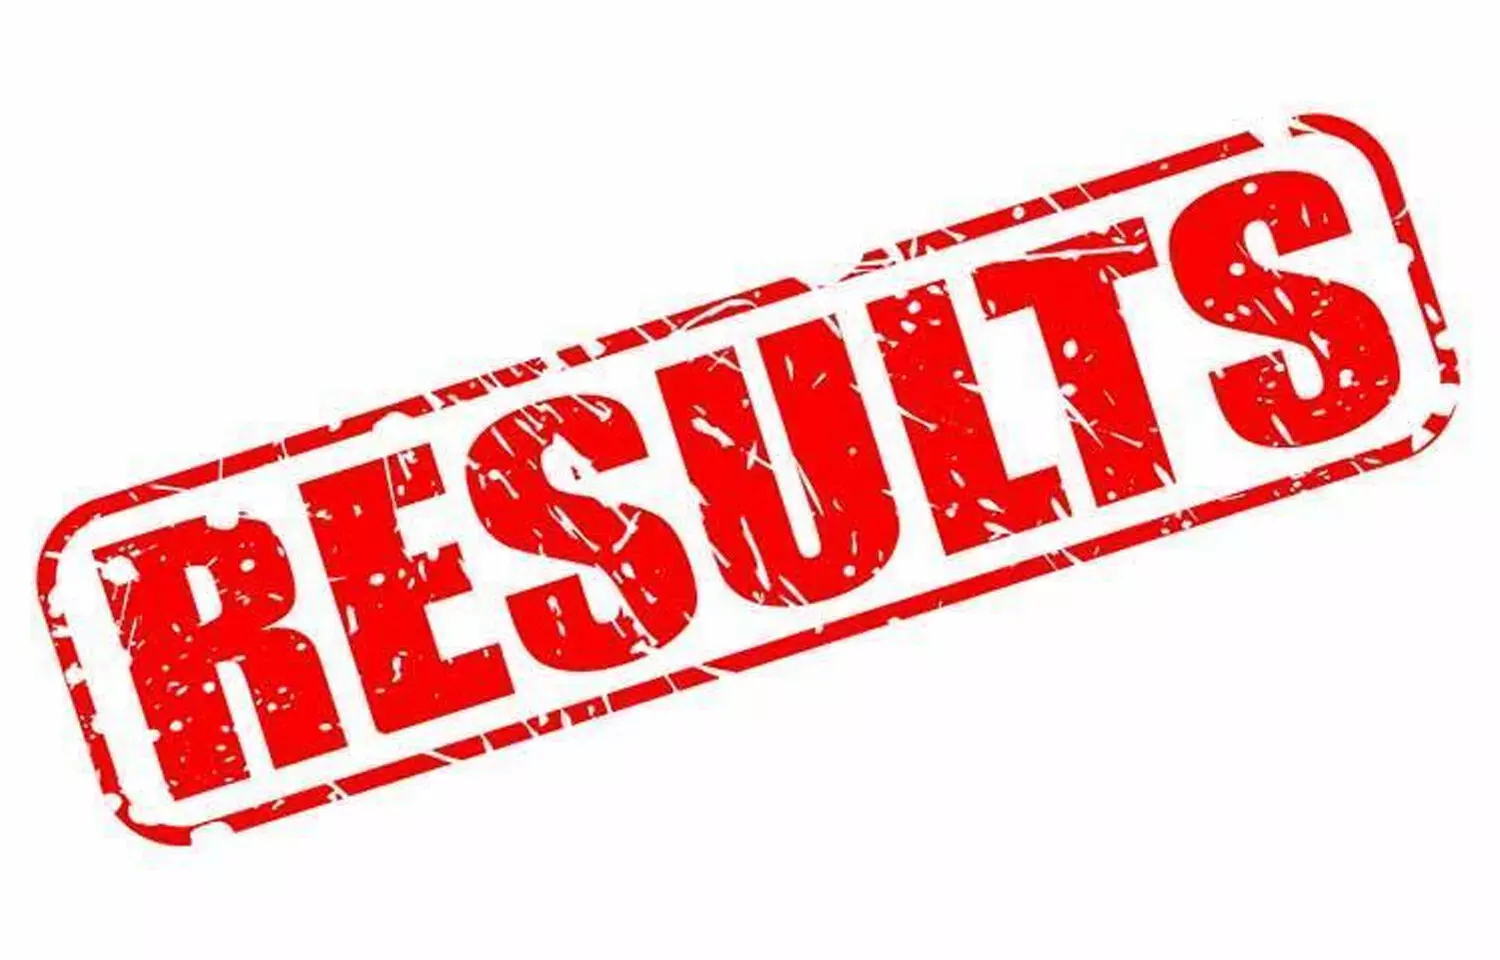 AIIMS releases DM, MCh Professional Exam results, Check out details